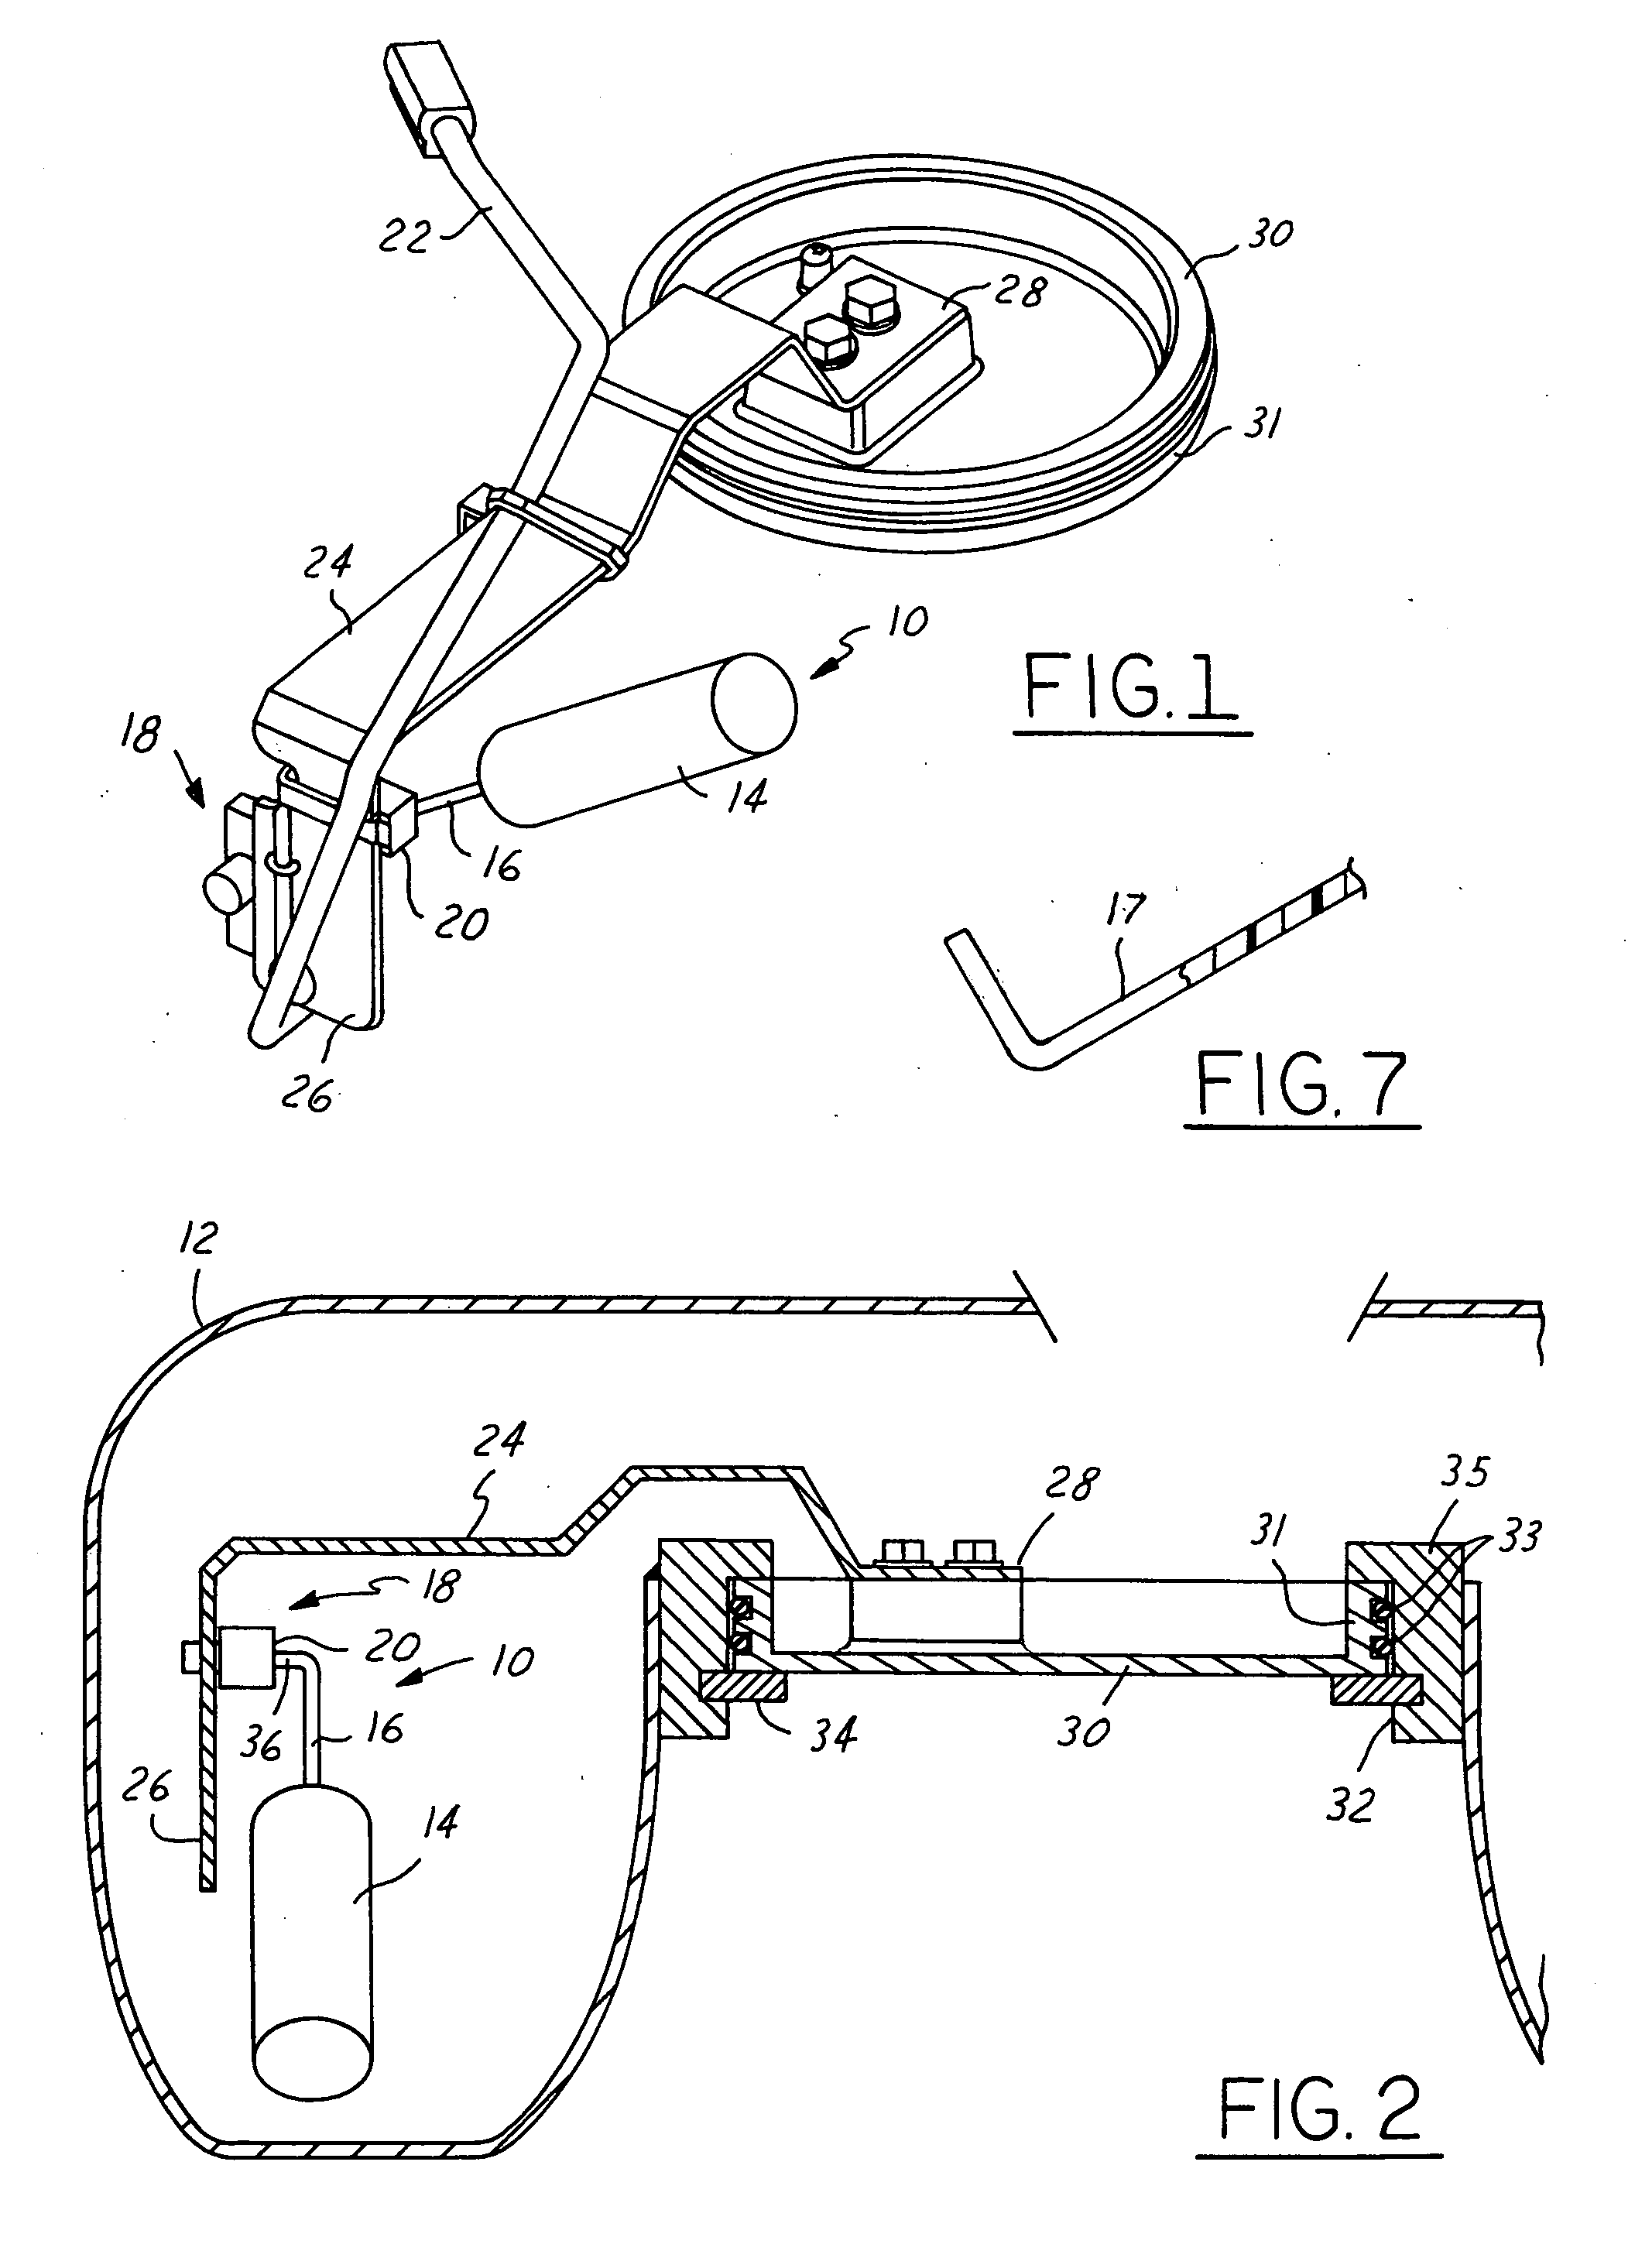 Float arm assembly and method of manufacture